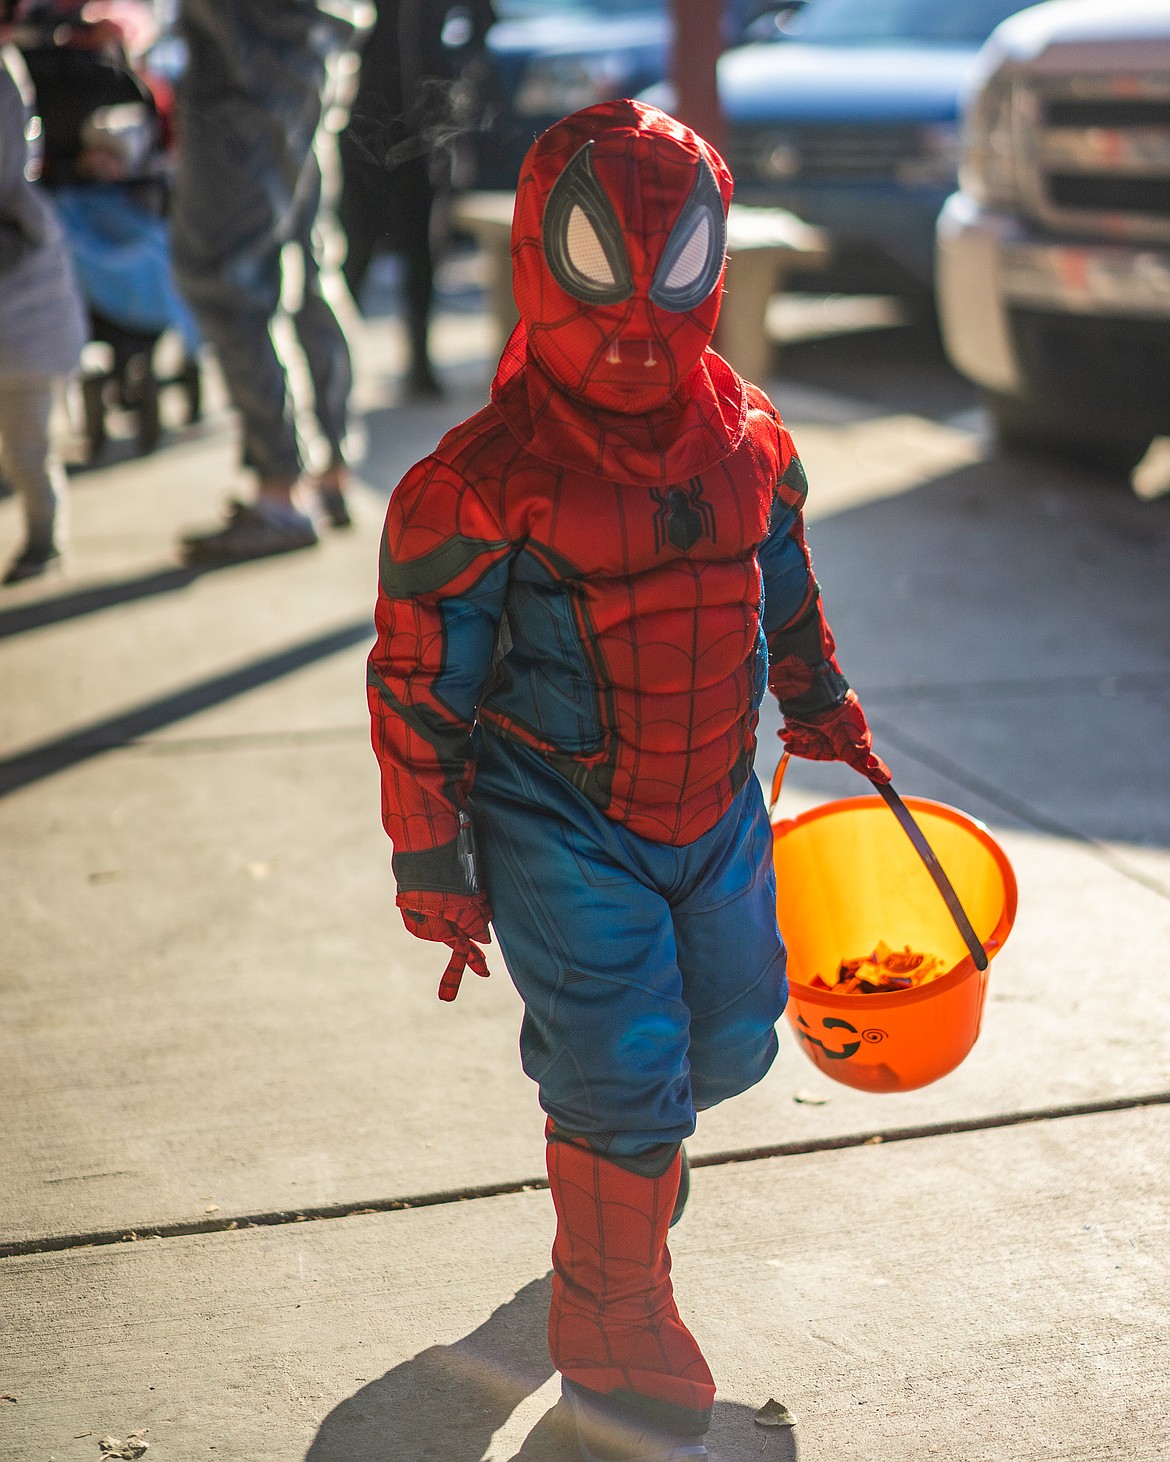 Spiderman prowls Central Avenue during the Whitefish Trick or Treat downtown on Thursday. (Daniel McKay/Whitefish Pilot)